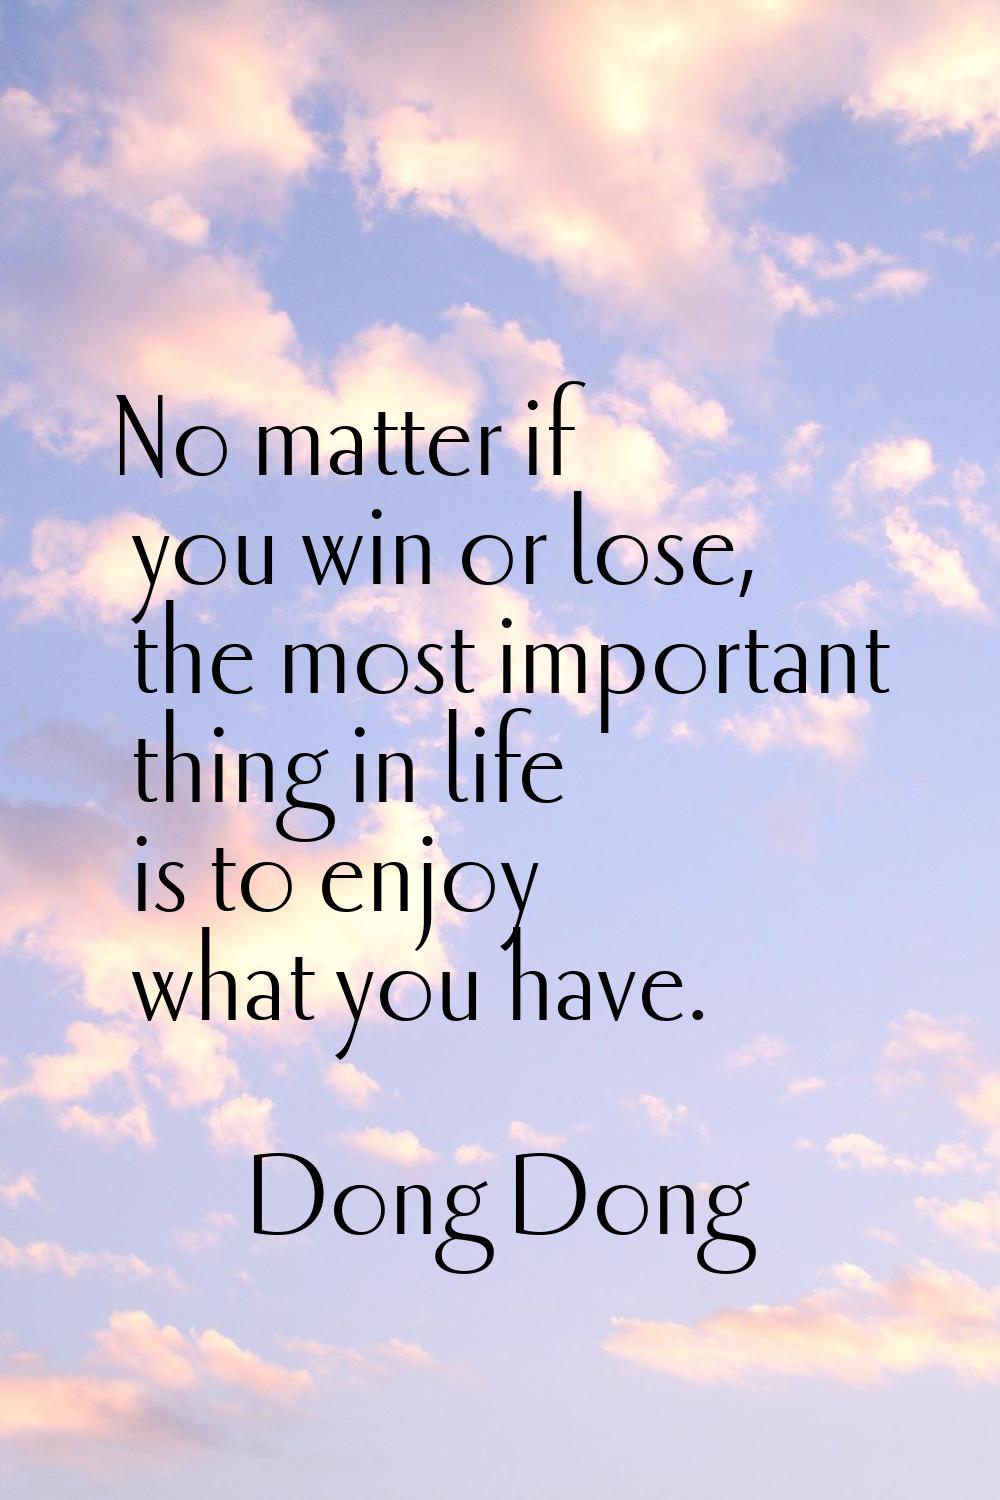 No matter if you win or lose, the most important thing in life is to enjoy what you have.